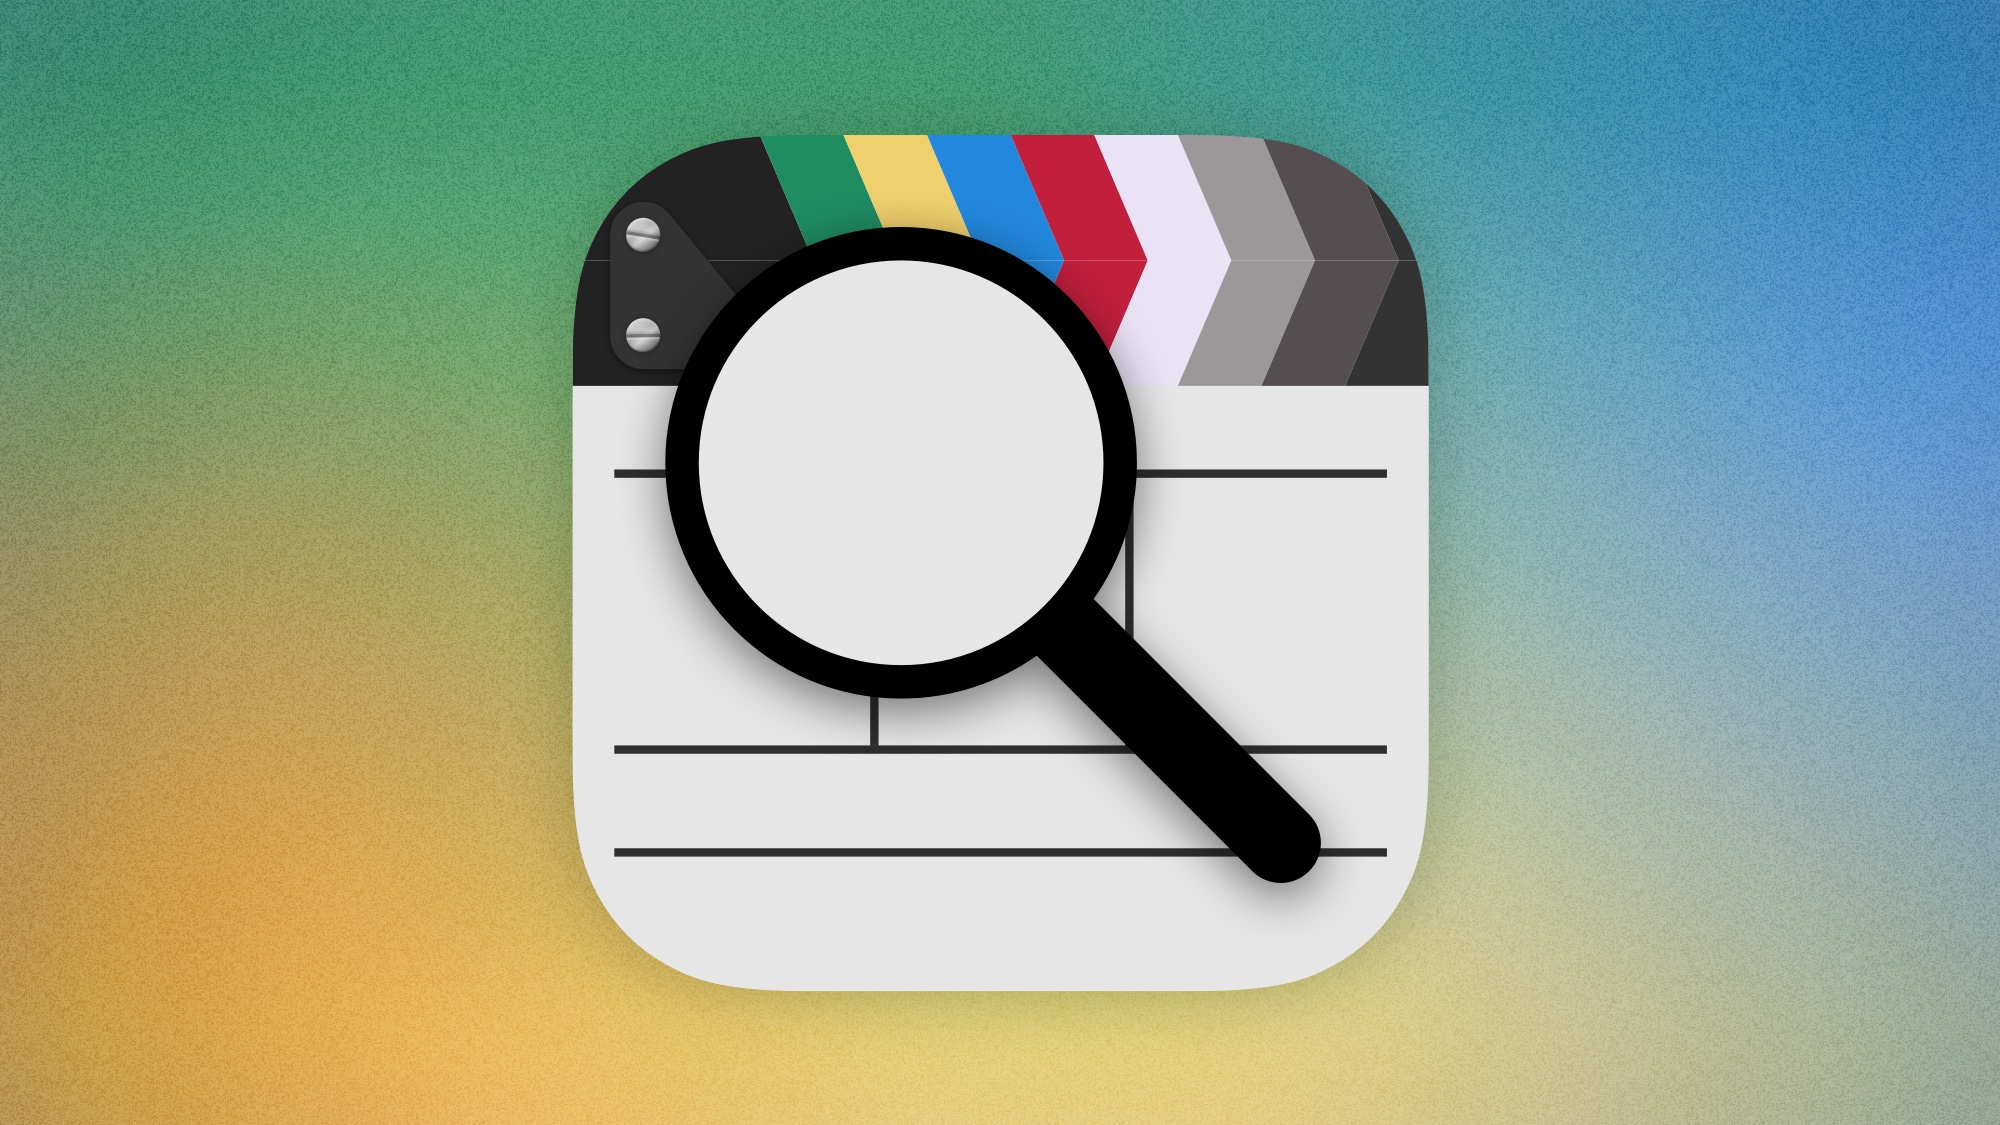 An unfinished app icon centred over a colourful background. It depicts a film slate with the clapper stick closed. A magnifying glass hovers above the slate in the centre of the icon, with a flat grey colour in its lens.